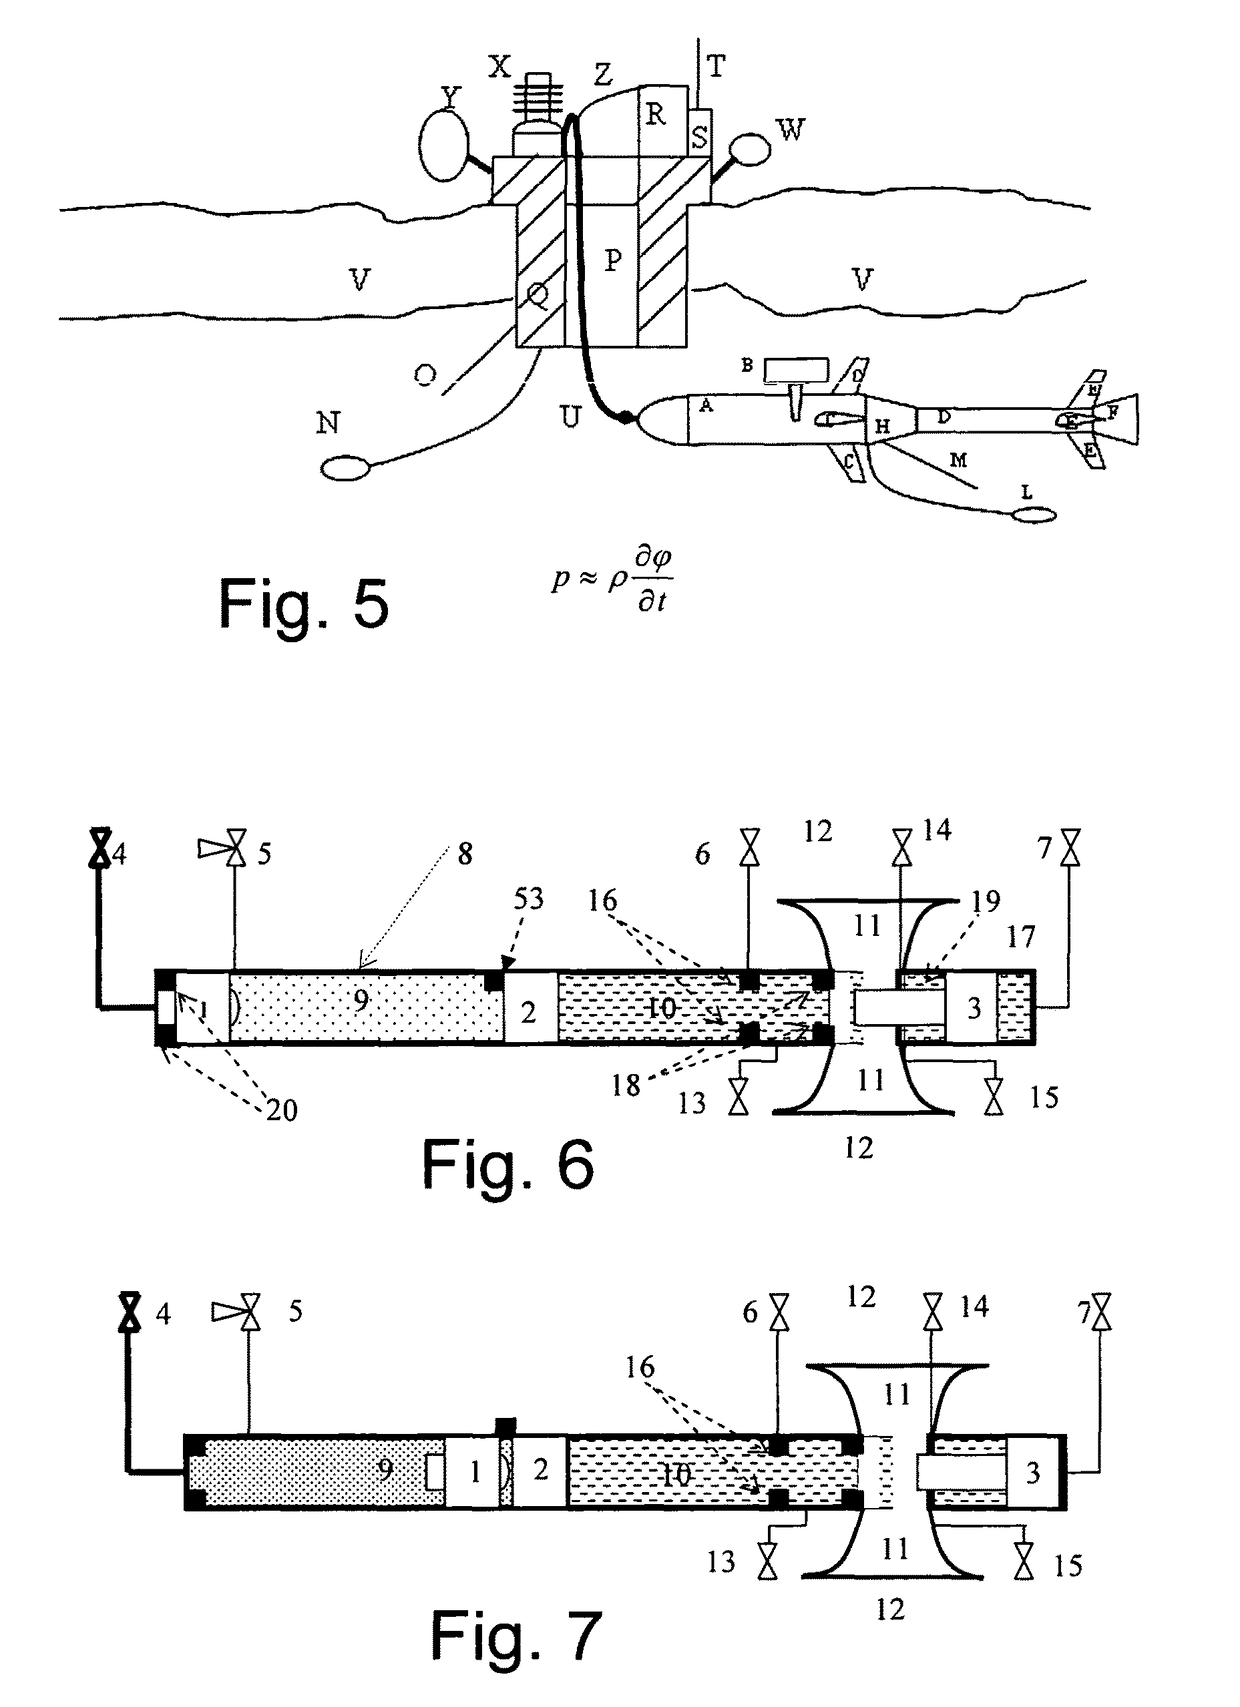 System for generating pressure waves in an underwater environment